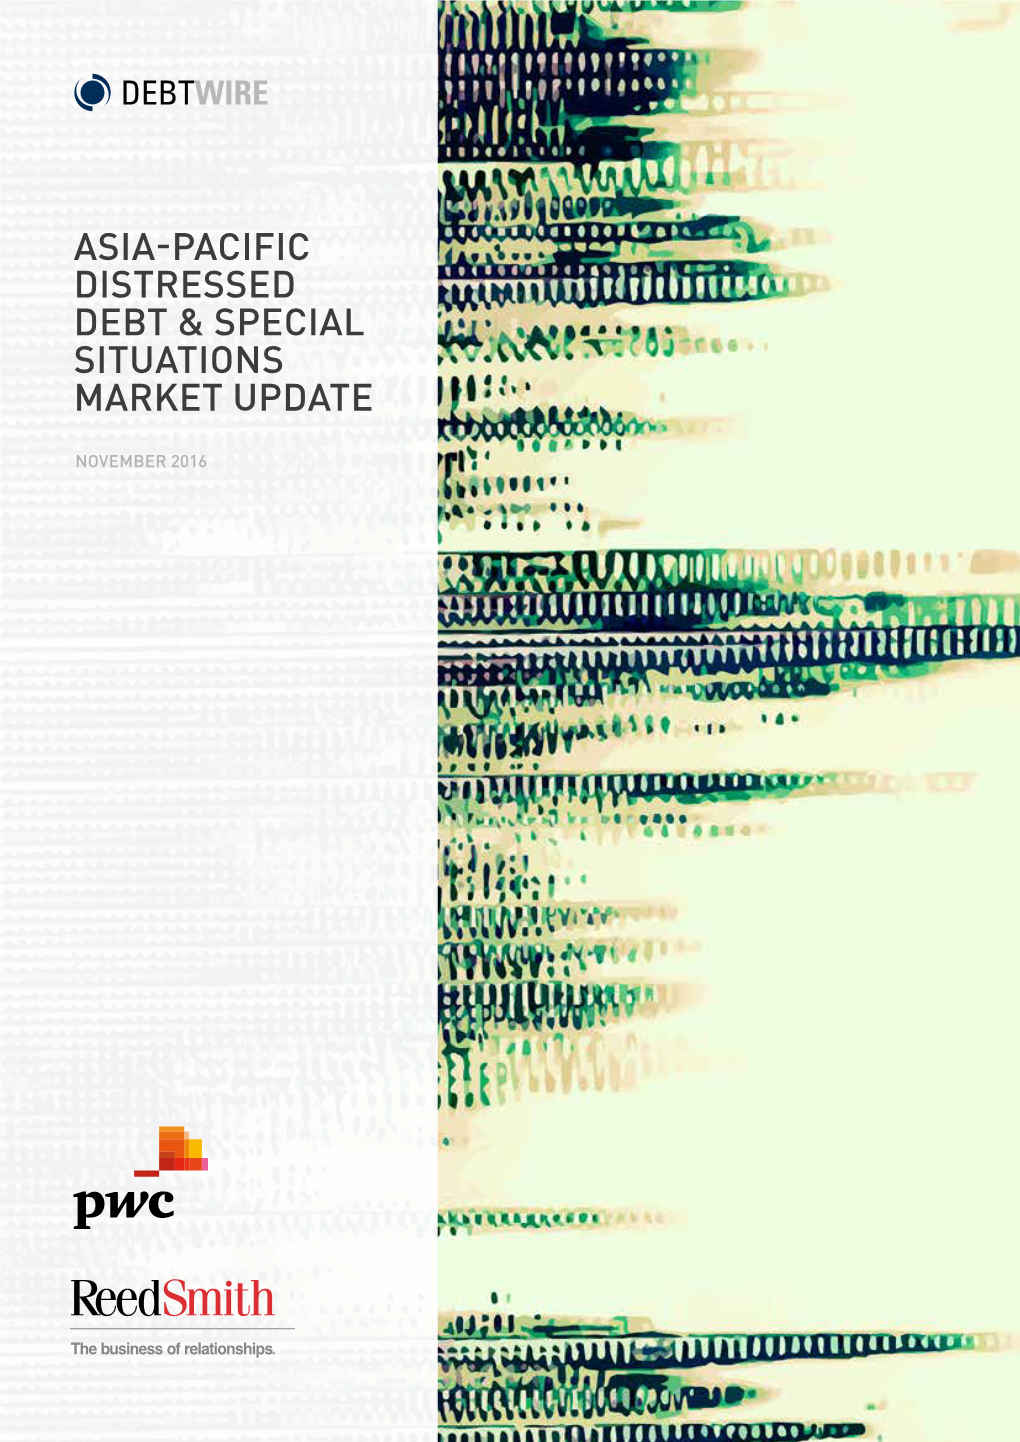 Asia-Pacific Distressed Debt & Special Situations